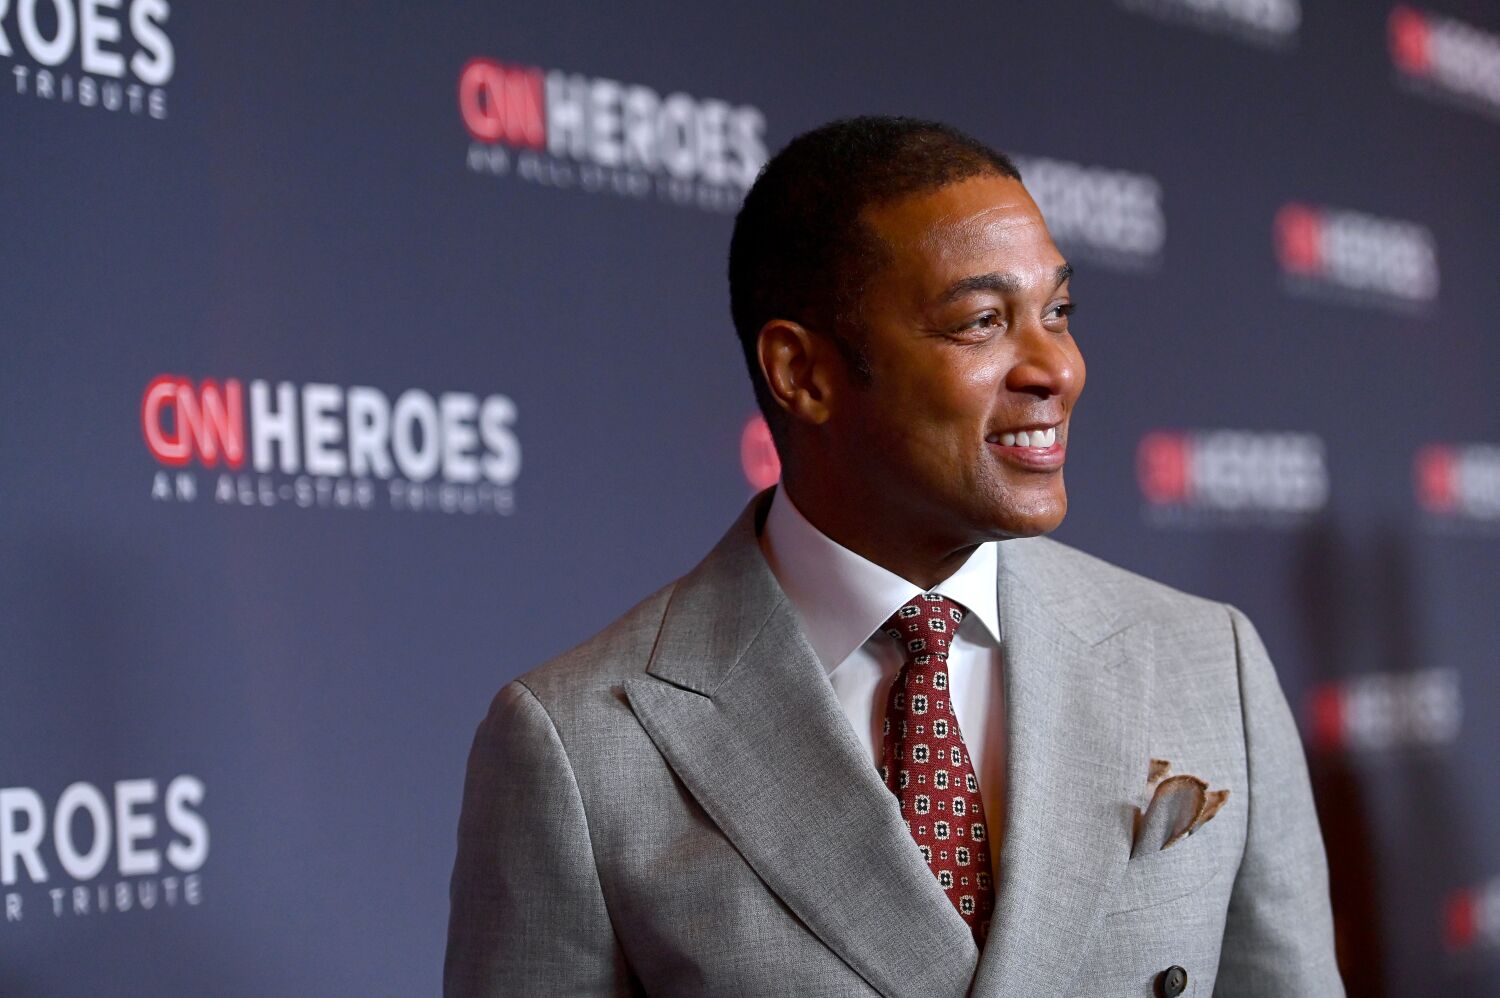 Don Lemon apologizes to CNN staff for comments about women: 'I'm sorry that I said it' 